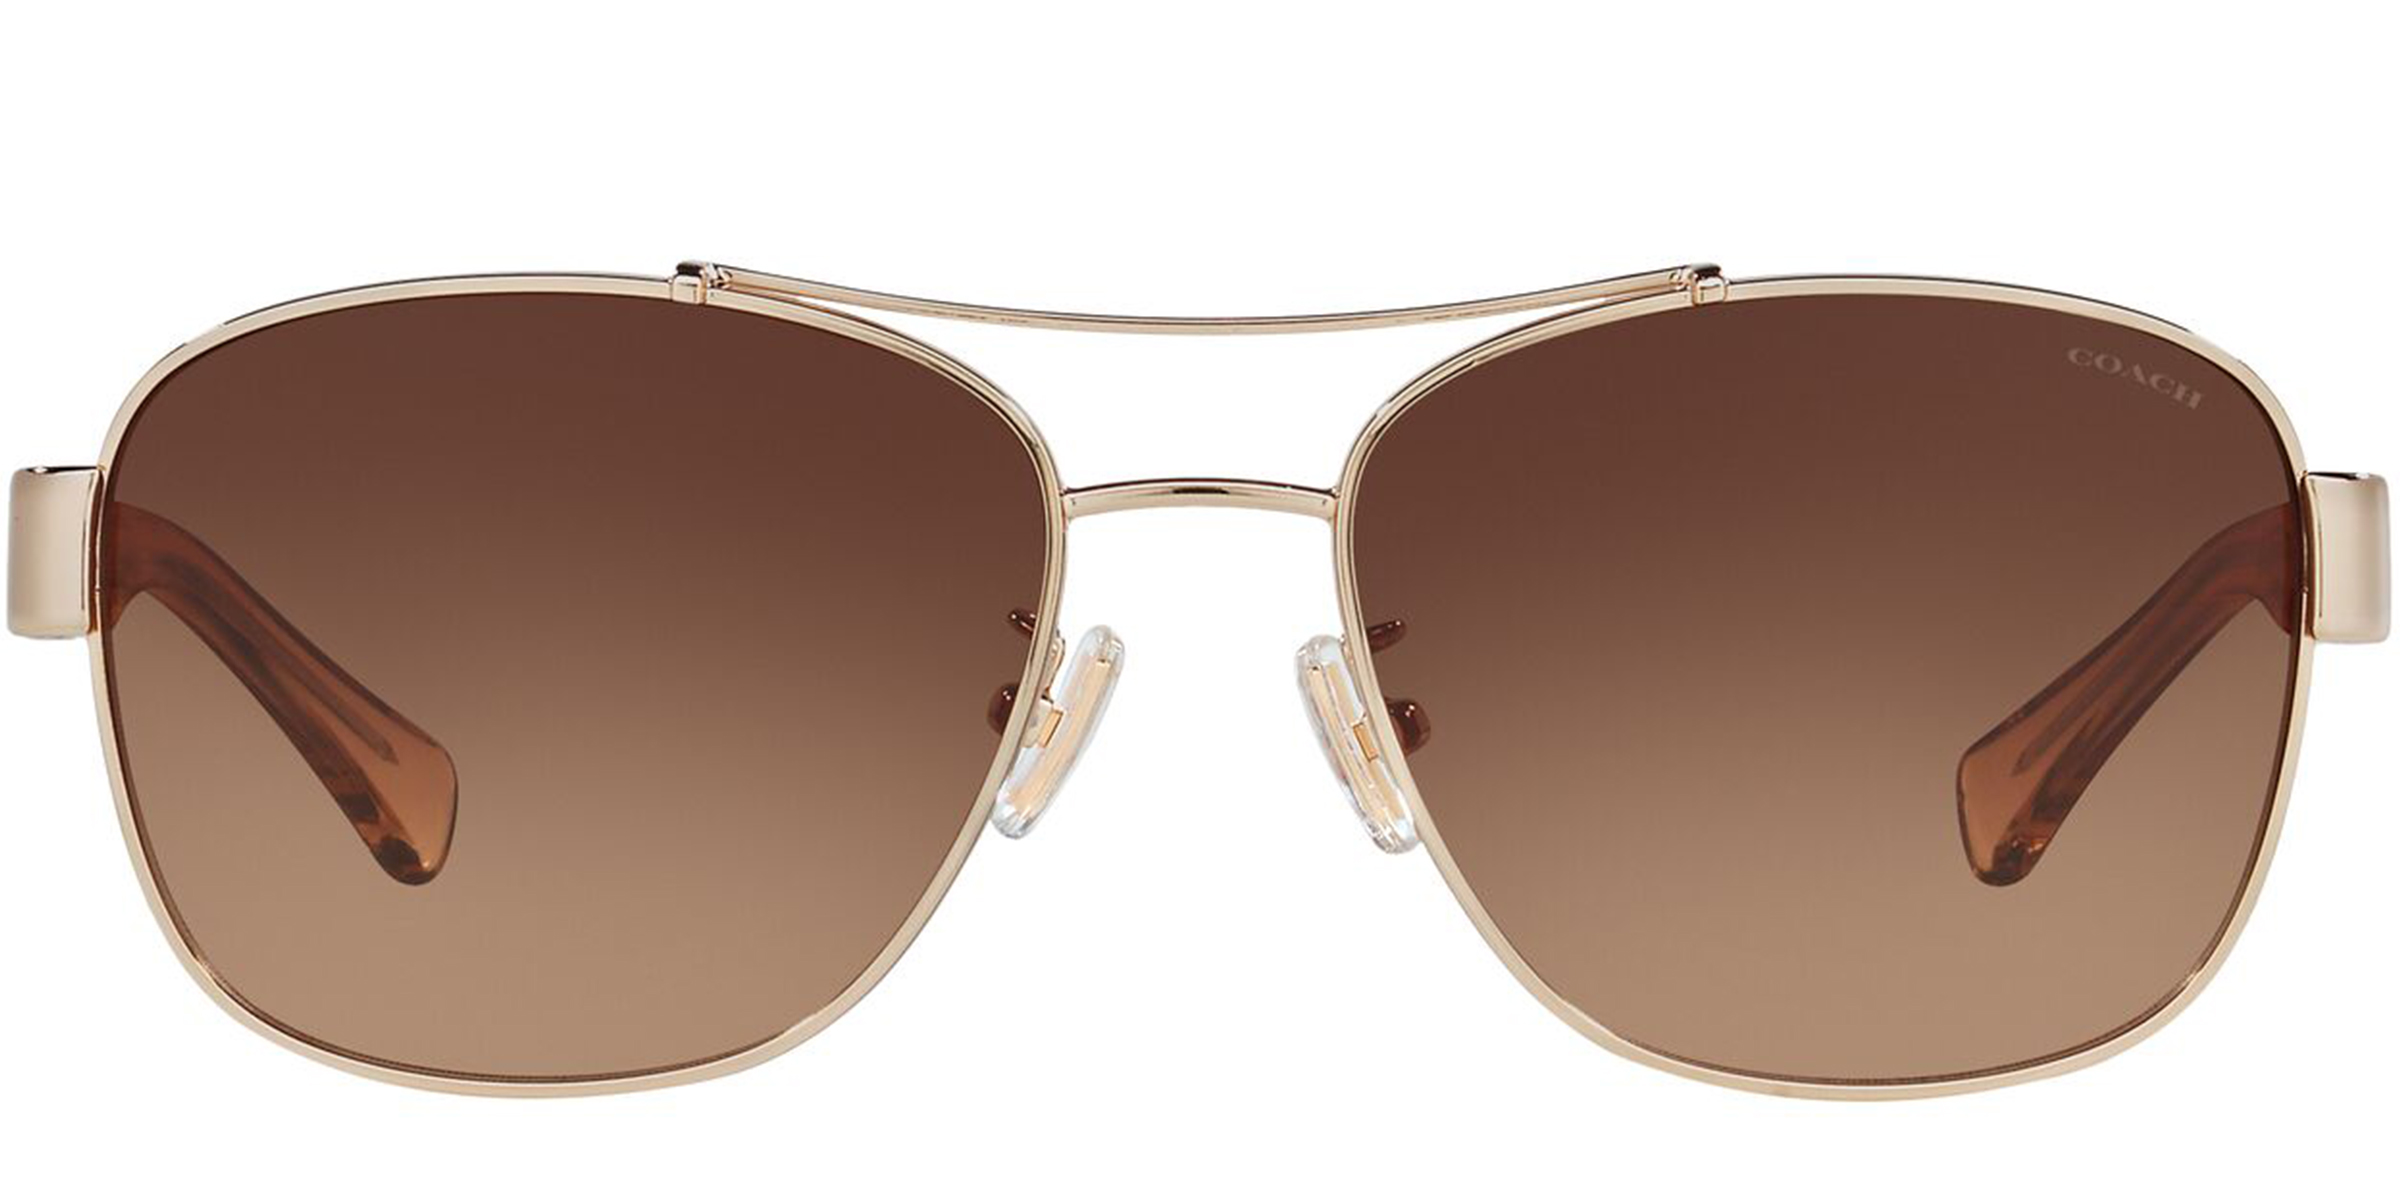 Buy Coach HC7064 L151 sunglasses for women at For Eyes